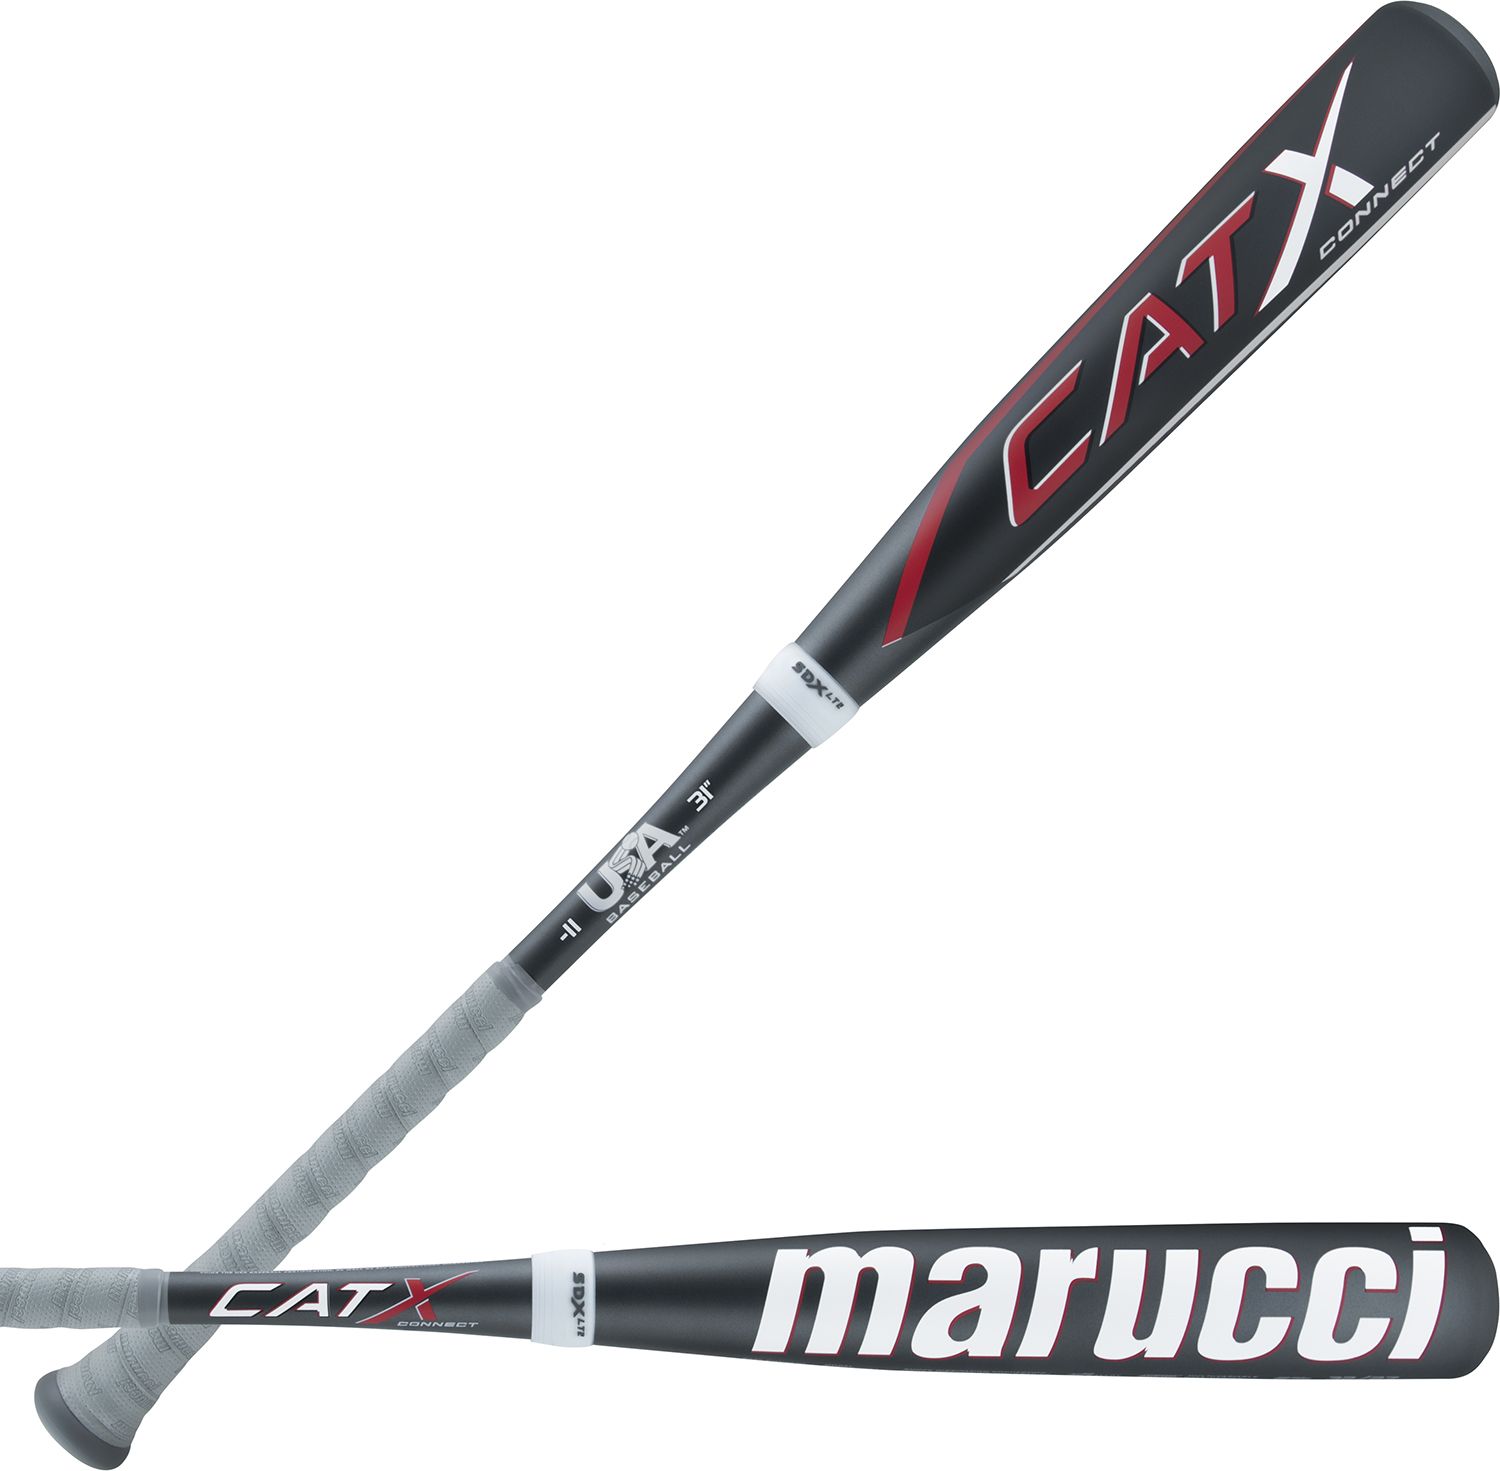 The Best USA Baseball Bats of the Year